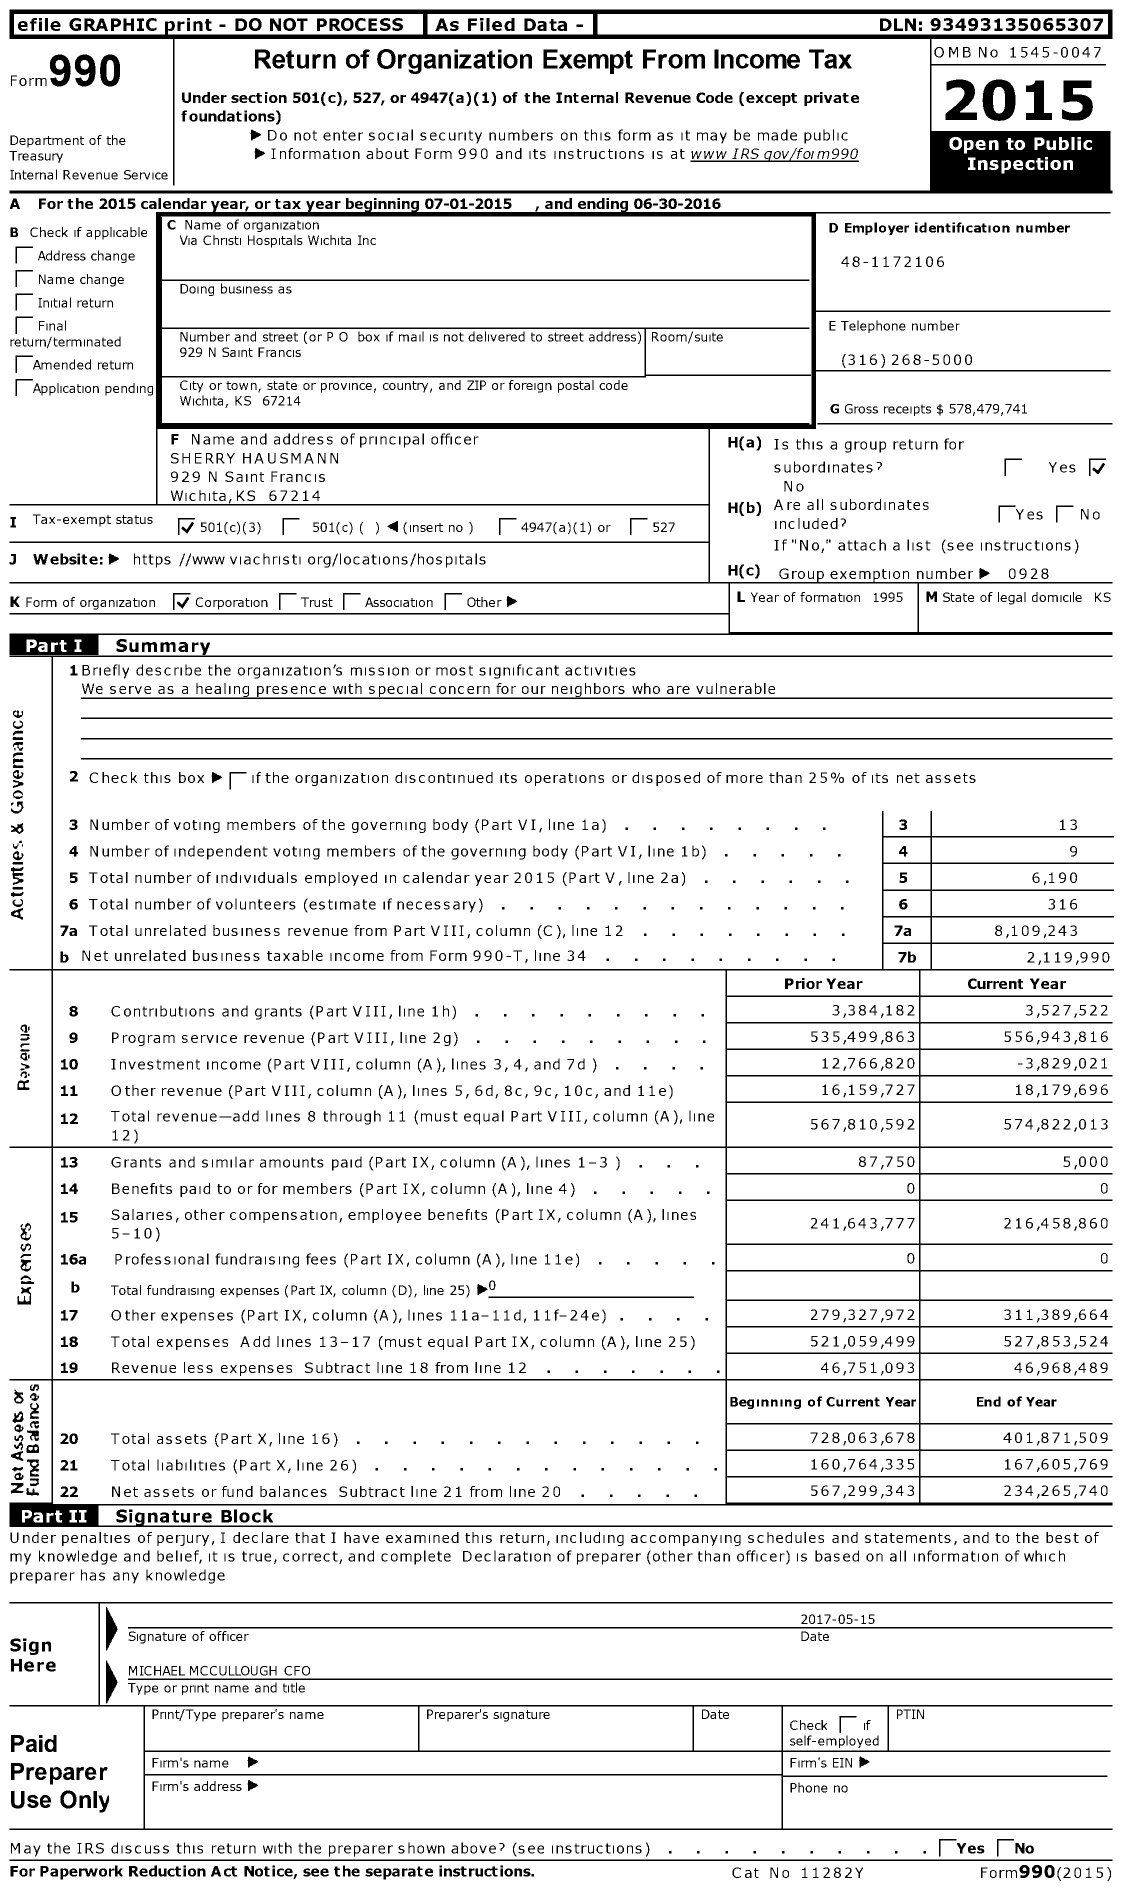 Image of first page of 2015 Form 990 for Ascension Via Christi Hospitals Wichita